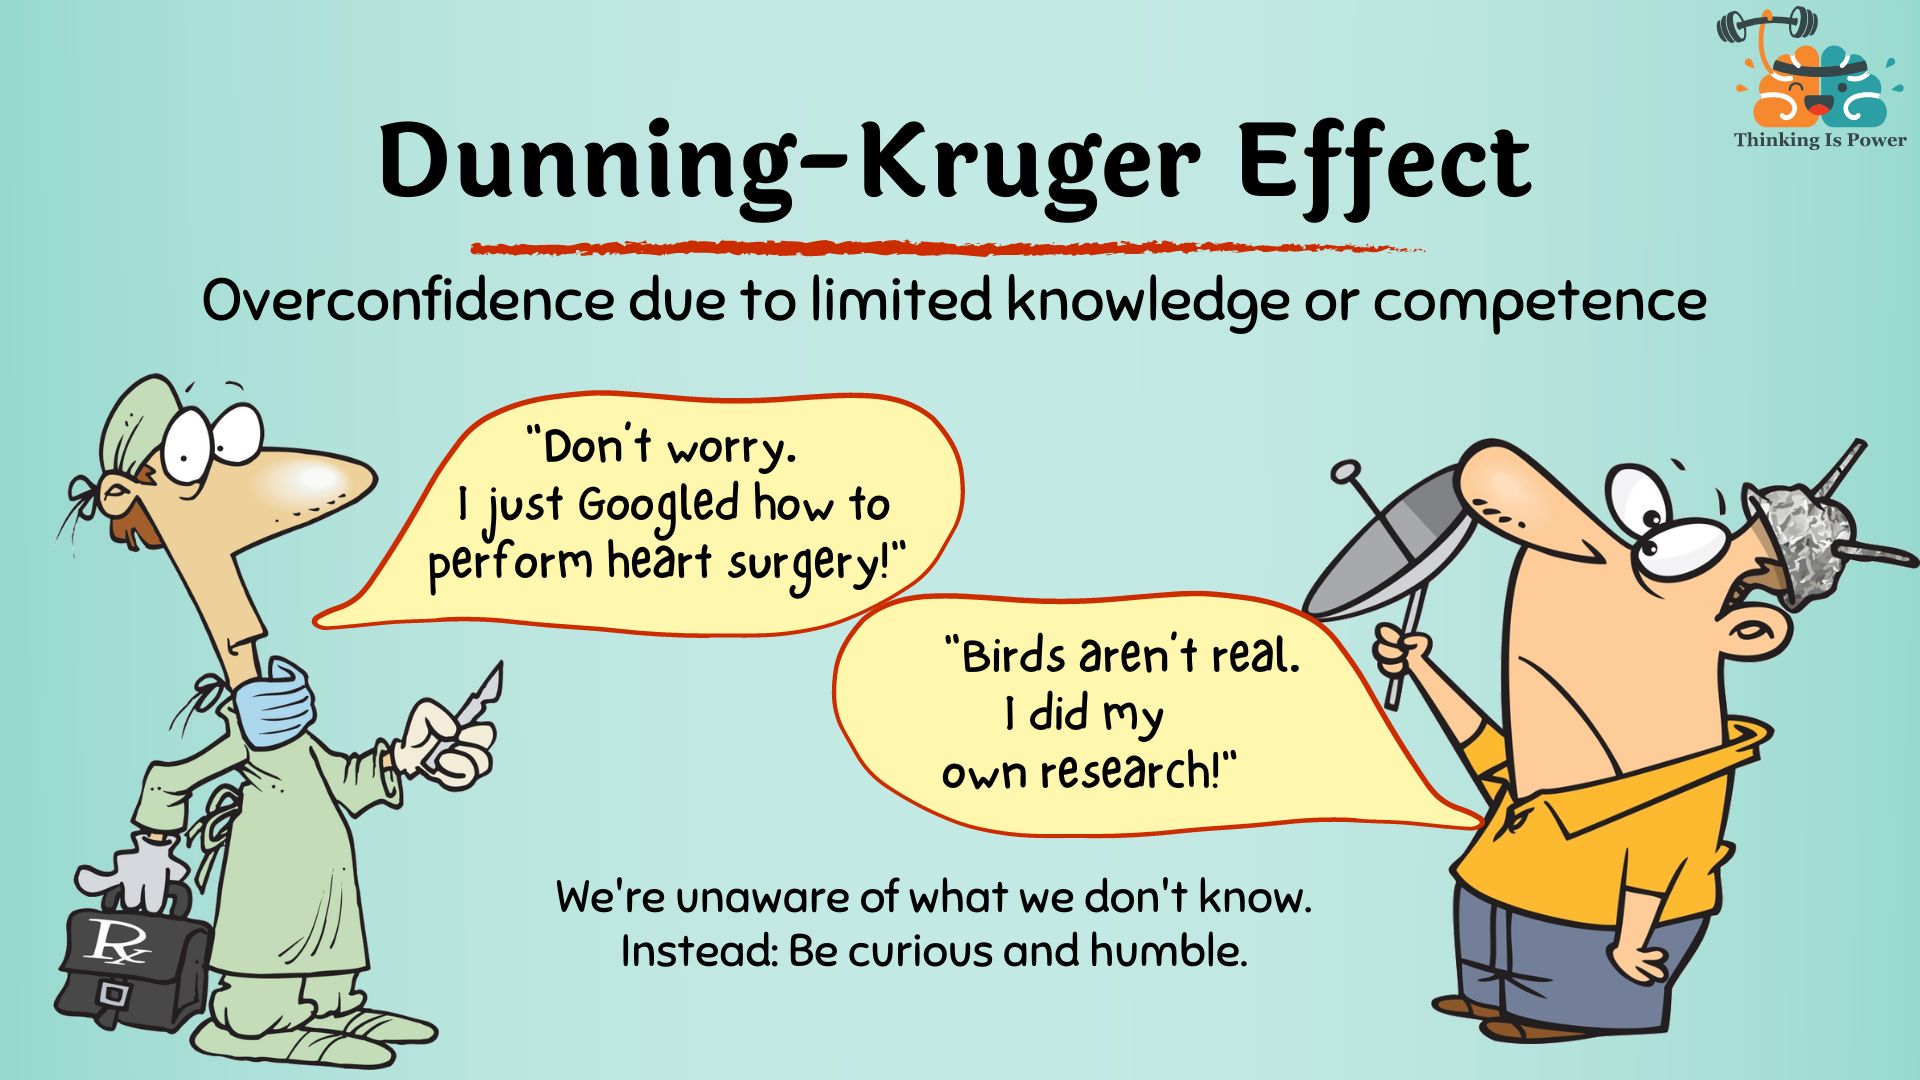 The Dunning-Kruger effect is overconfidence due to limited knowledge or competence. Shown is someone who says, Don't worry, I just Googled how to perform heart surgery! And a man with a tinfoil hat saying, birds aren't real. I did my own research! We're unaware of what we don't know. Instead: Be curious and humble.